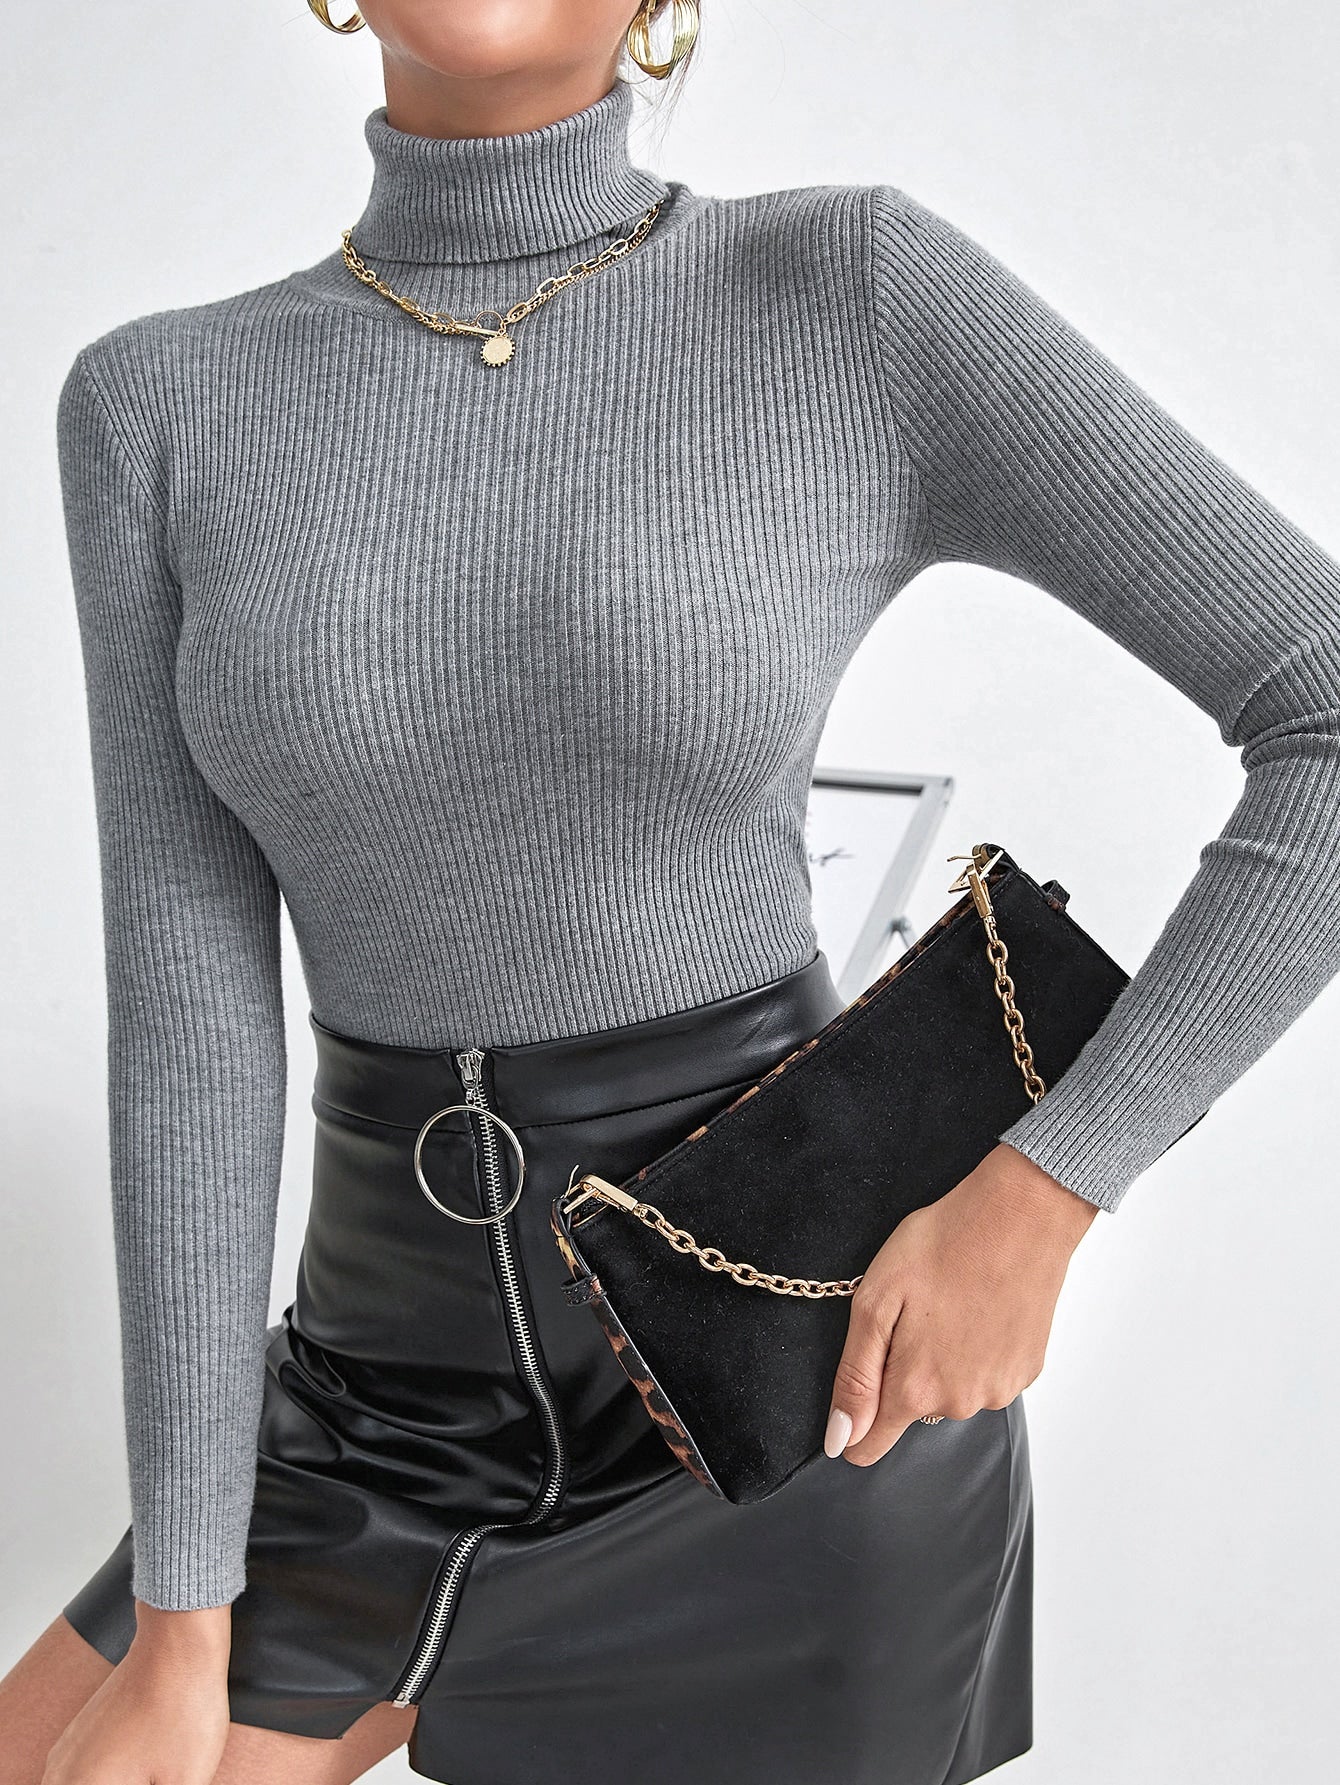 Solid High Neck Rib Knit Sweater